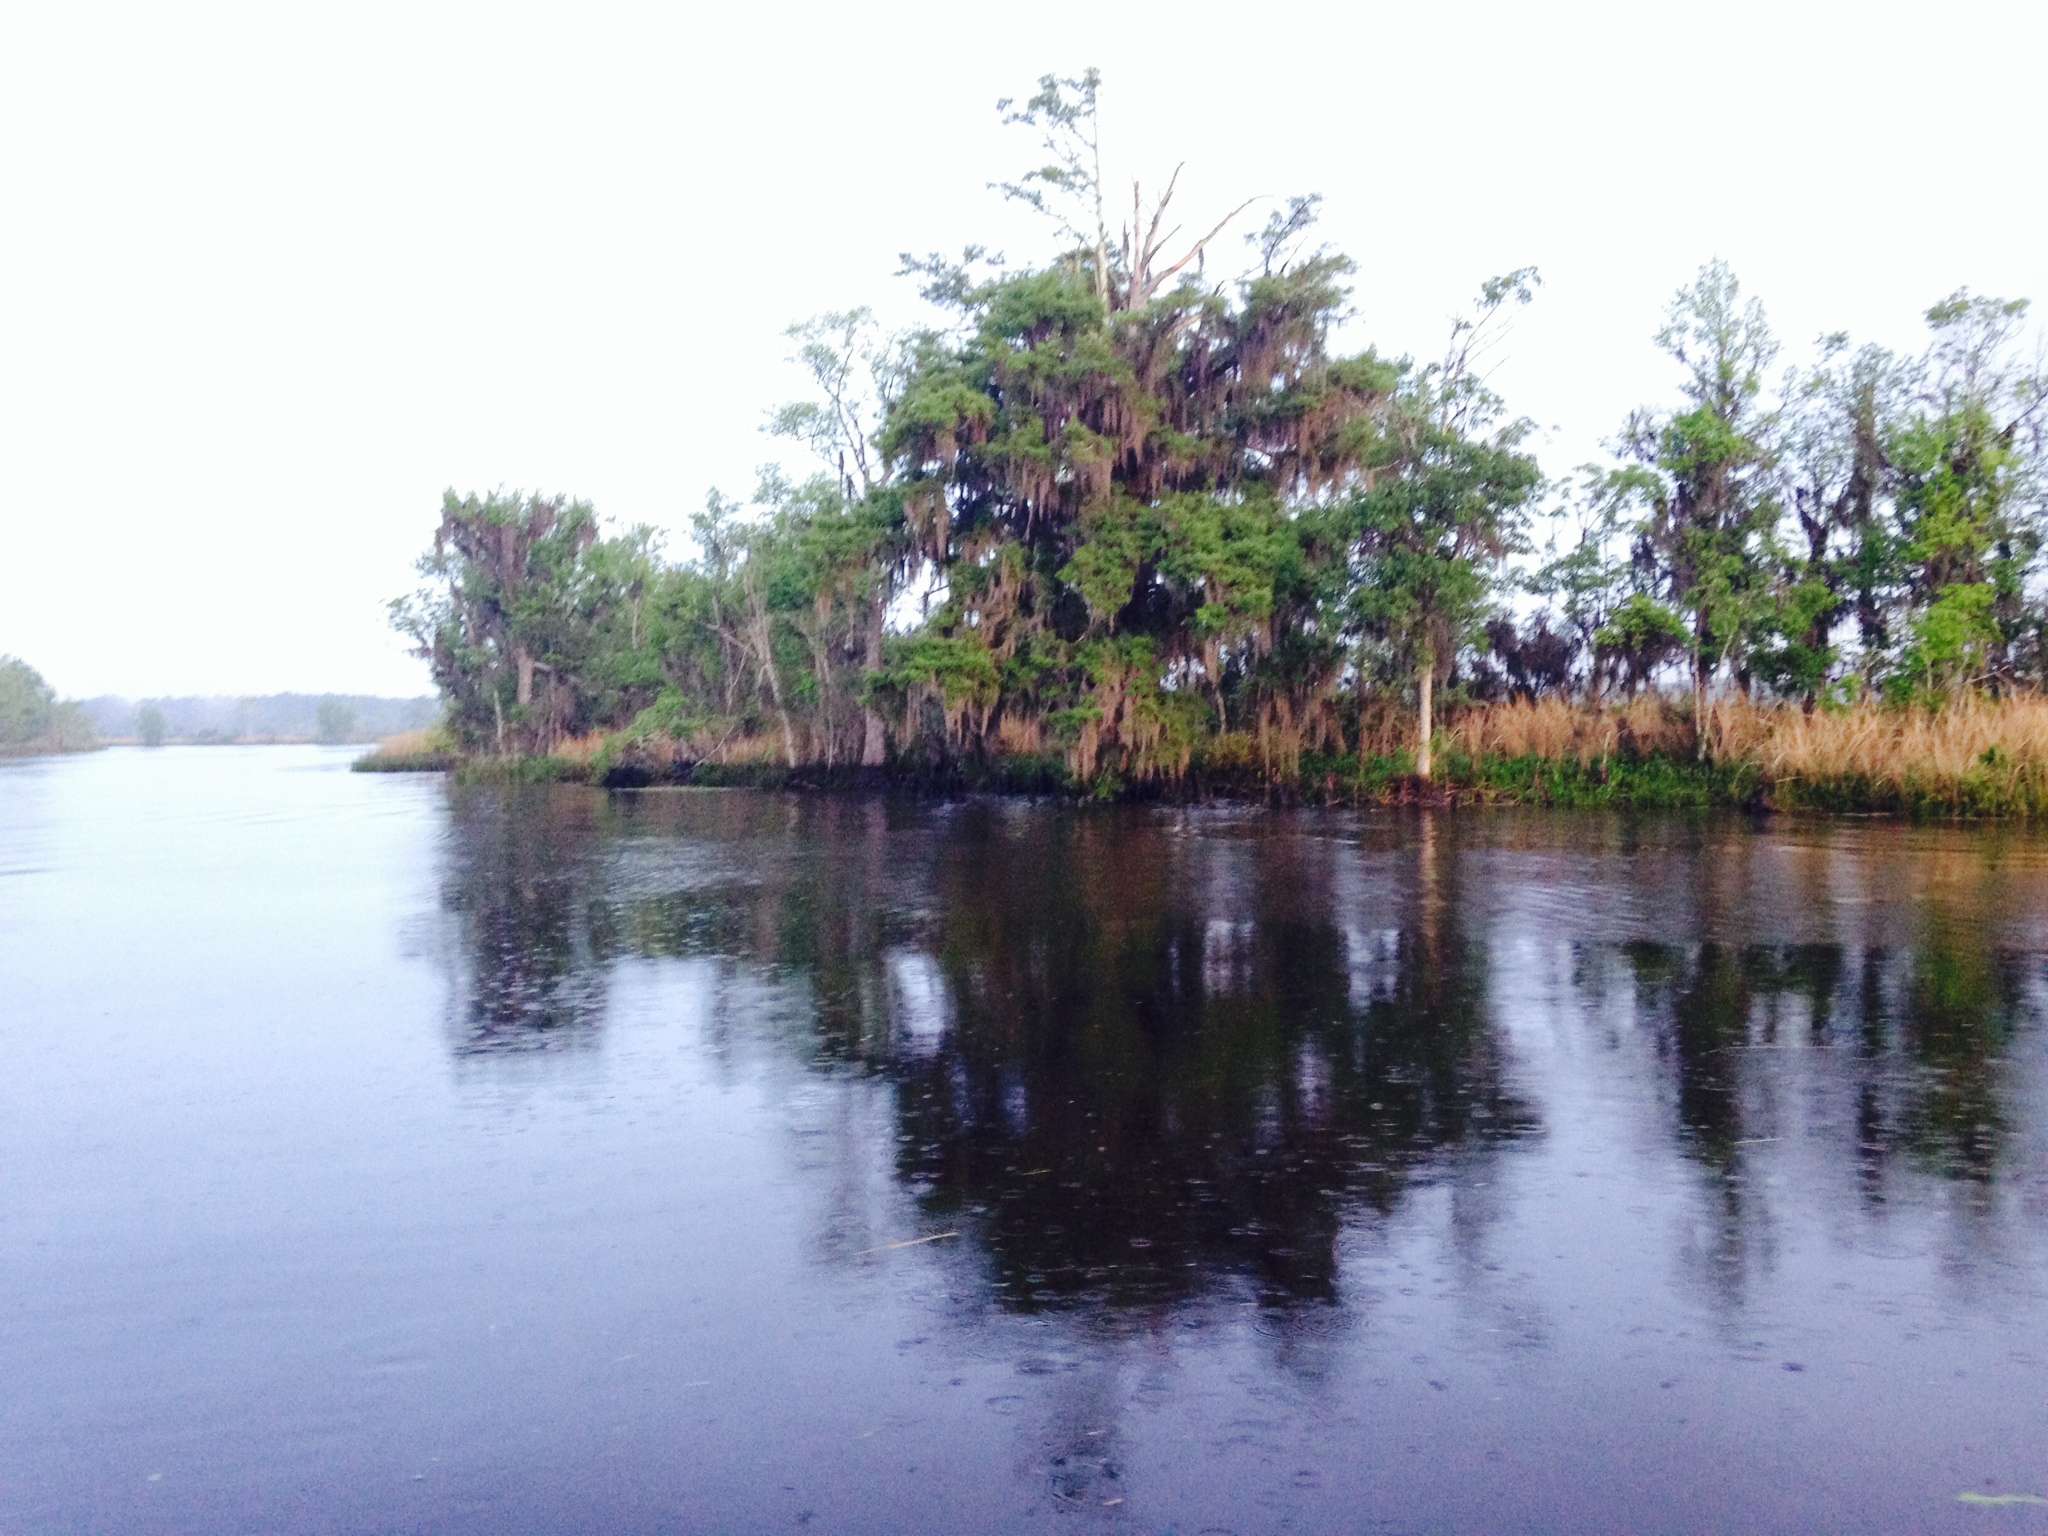 Large trees also line the fishery.